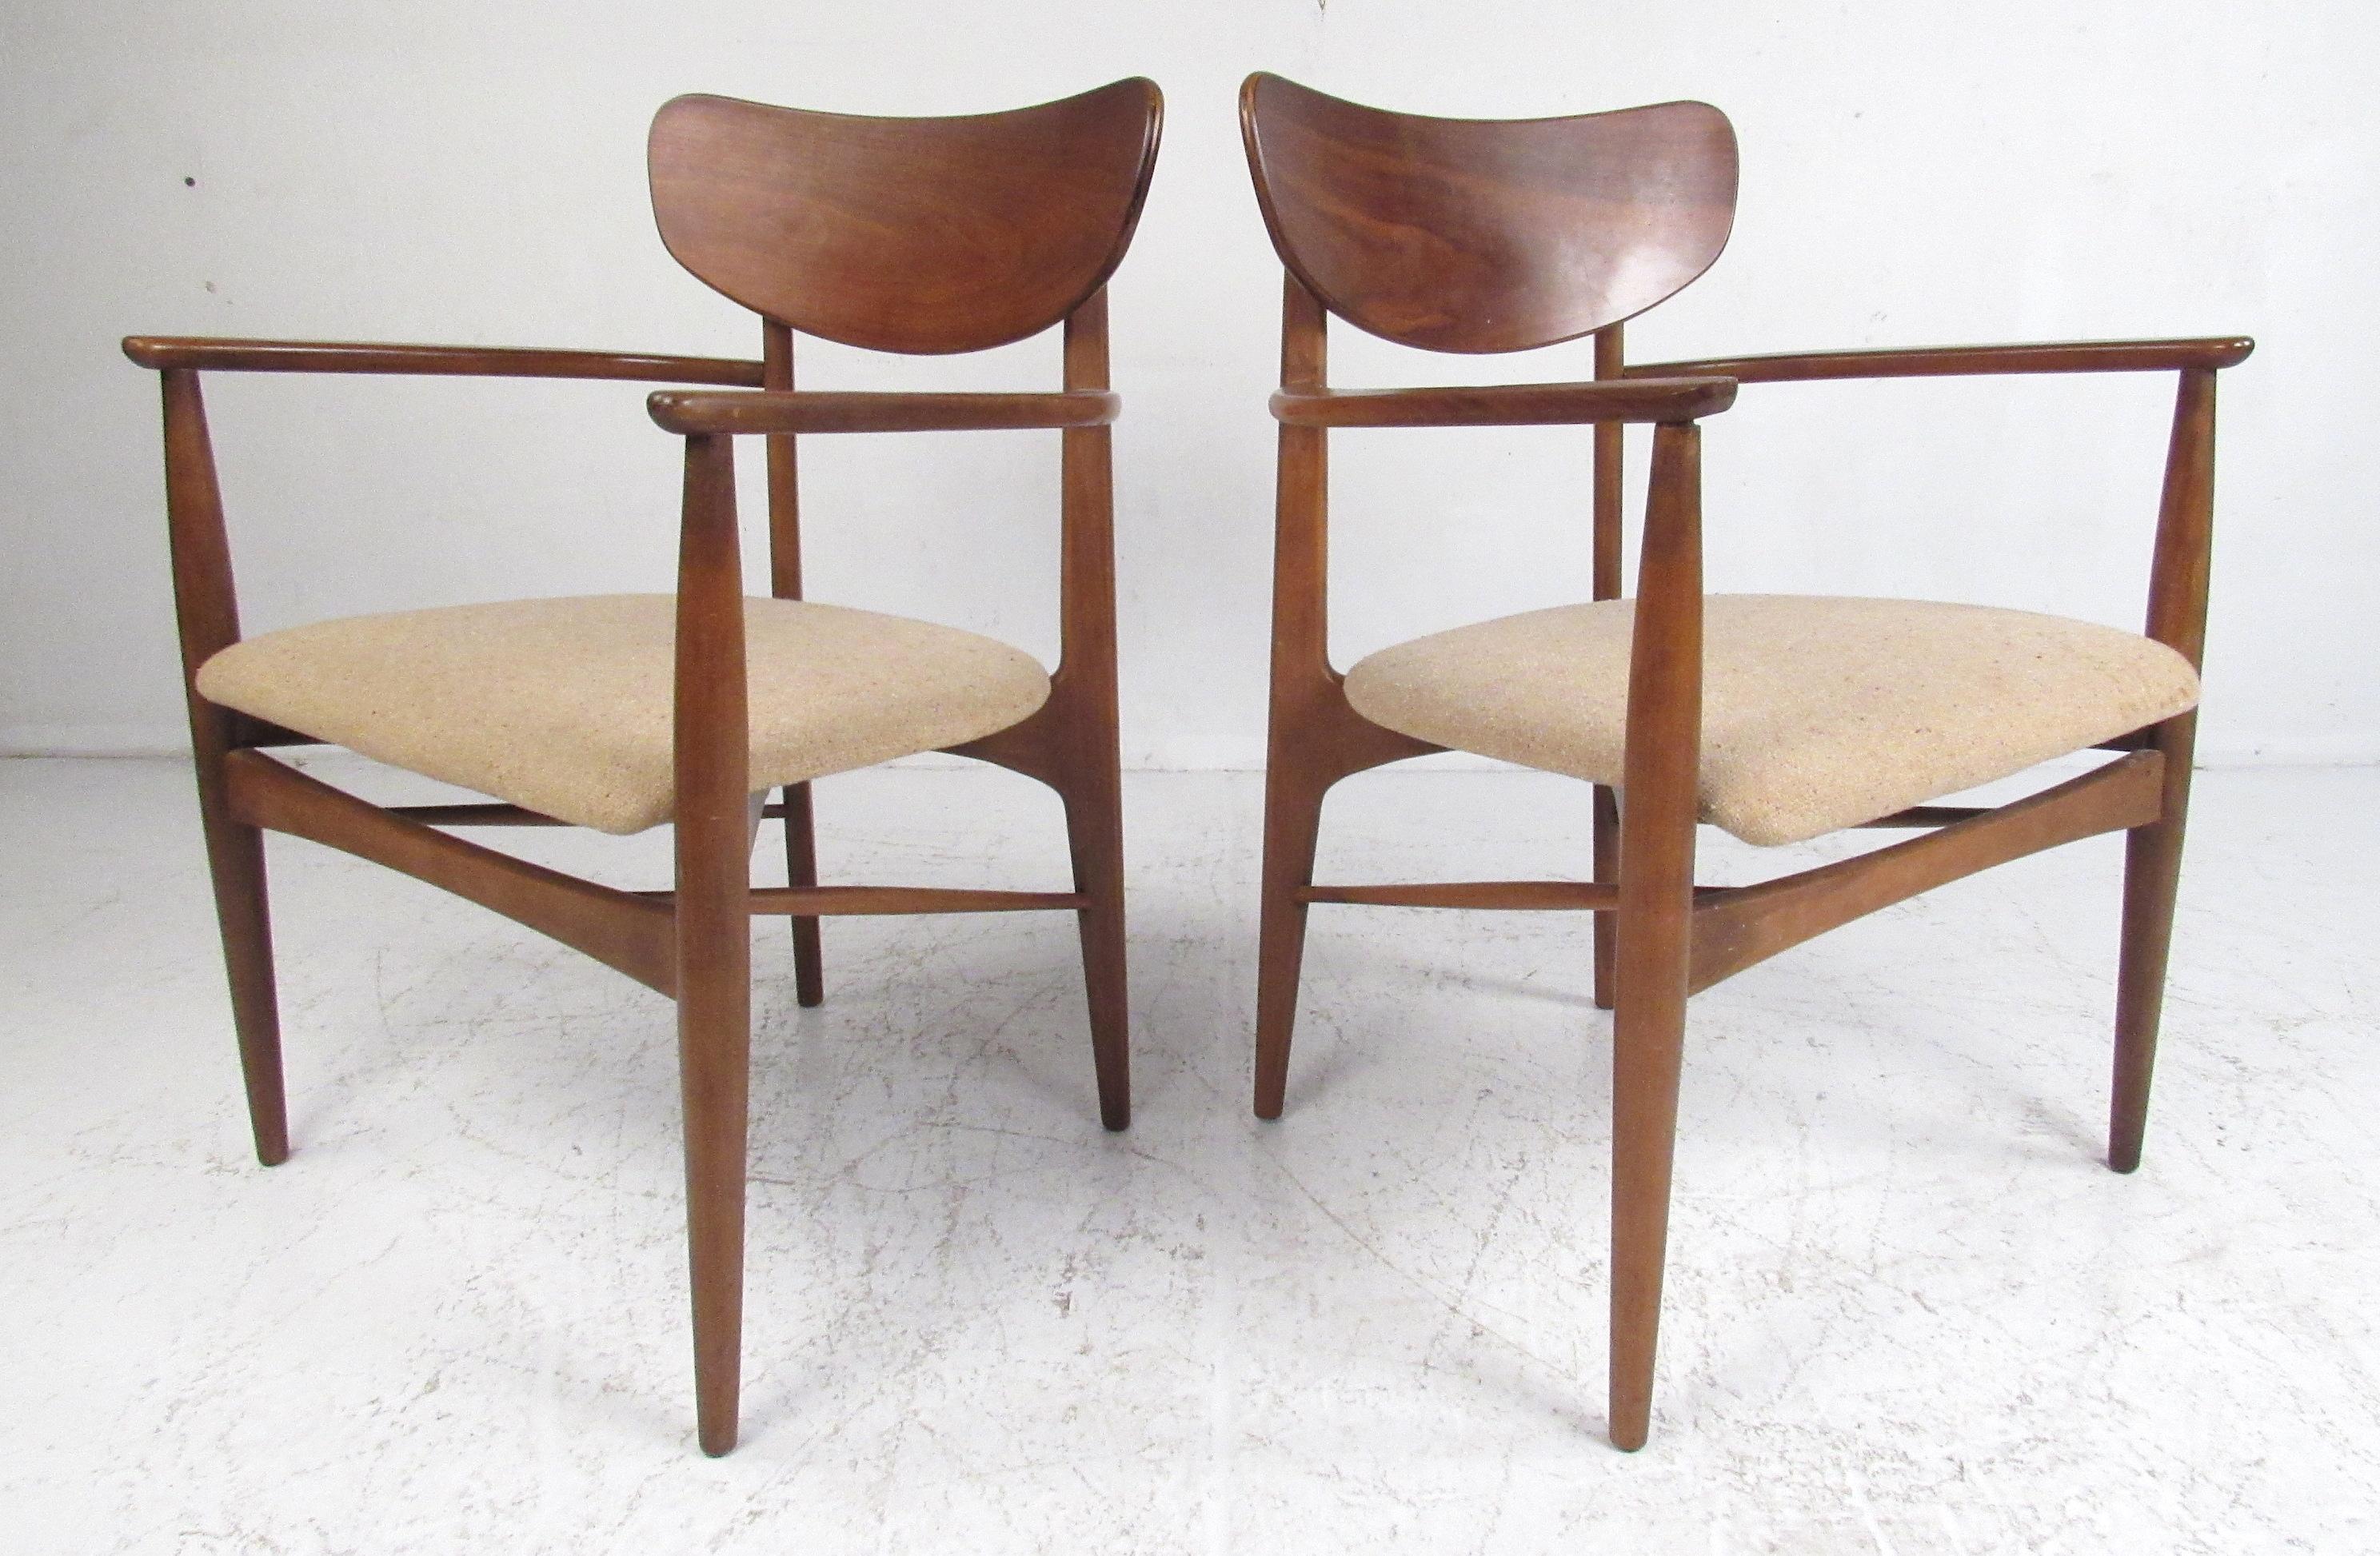 Elegant set of six teak midcentury dining chairs in the style of Danish modern. Please confirm item location (NY or NJ).